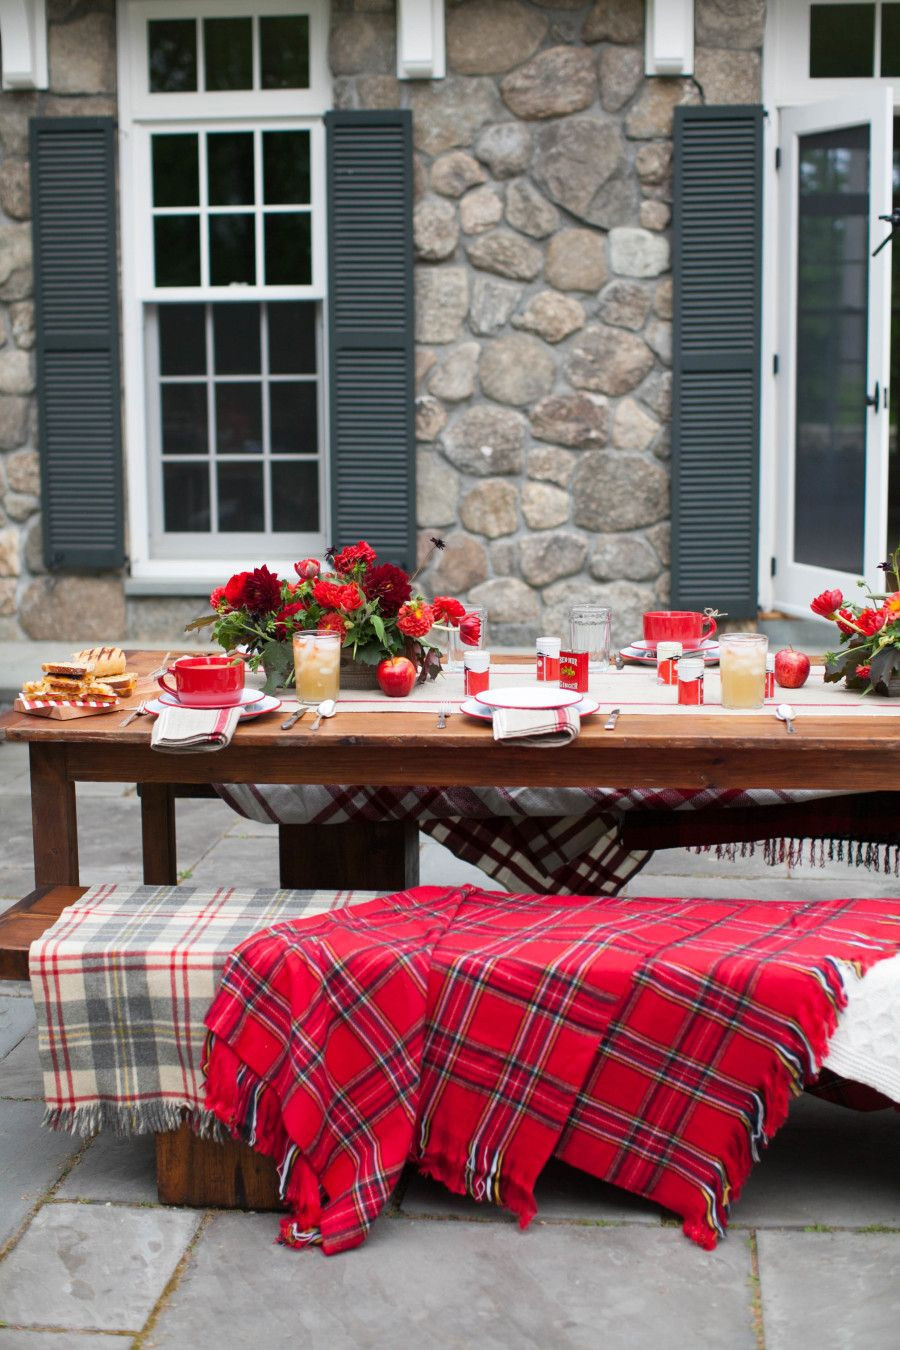 Backyard Fall Party Ideas
 Prep Your Patio for Fall With These Backyard Tips